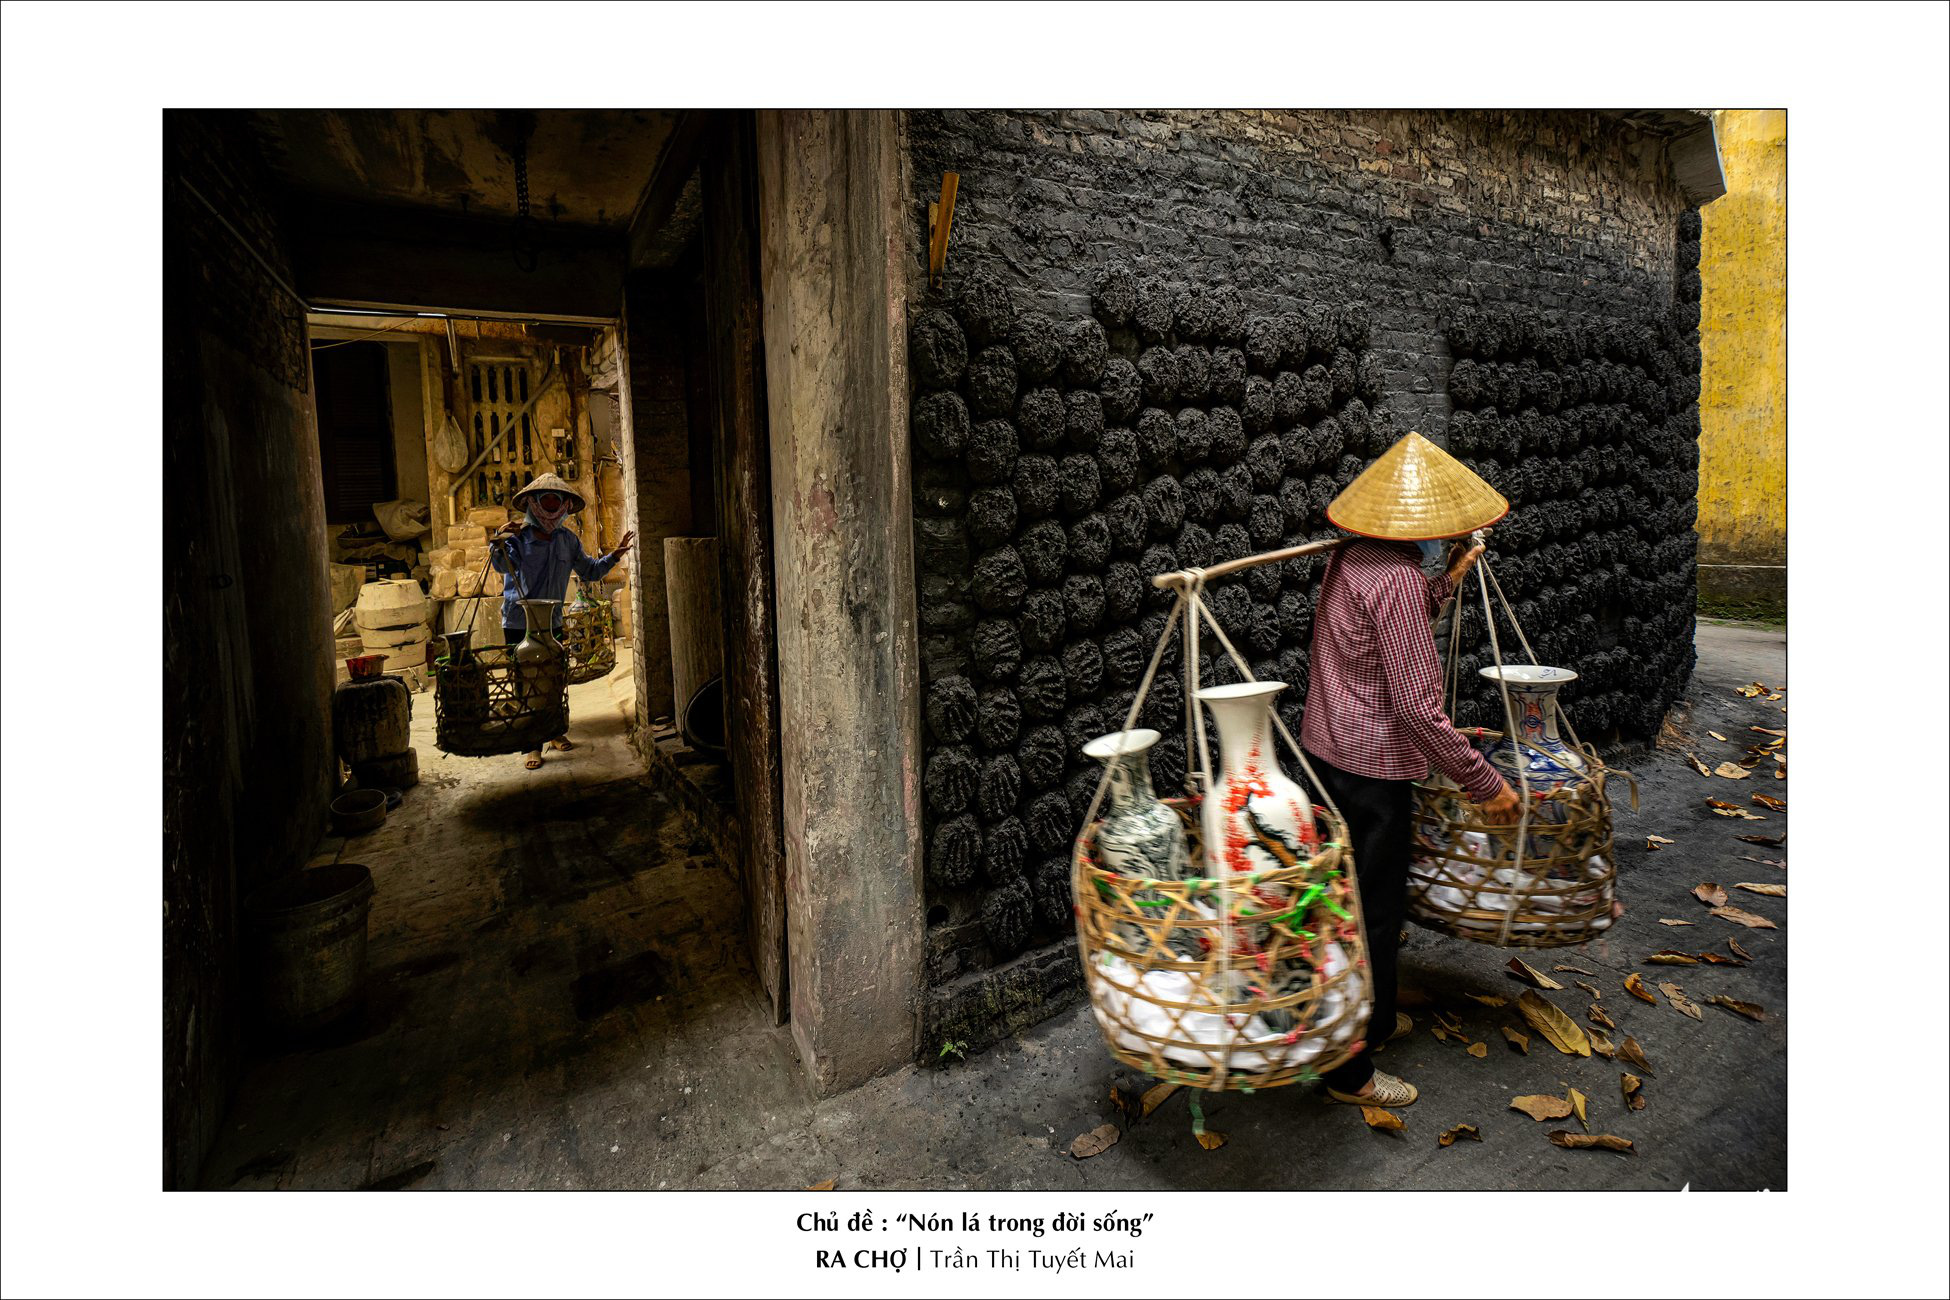 Women wearing ‘non la’ hold a bamboo stick over their shoulders while carrying two baskets of vases in this photo on display at the Ho Chi Minh City Photography Association (HOPA) headquarters.